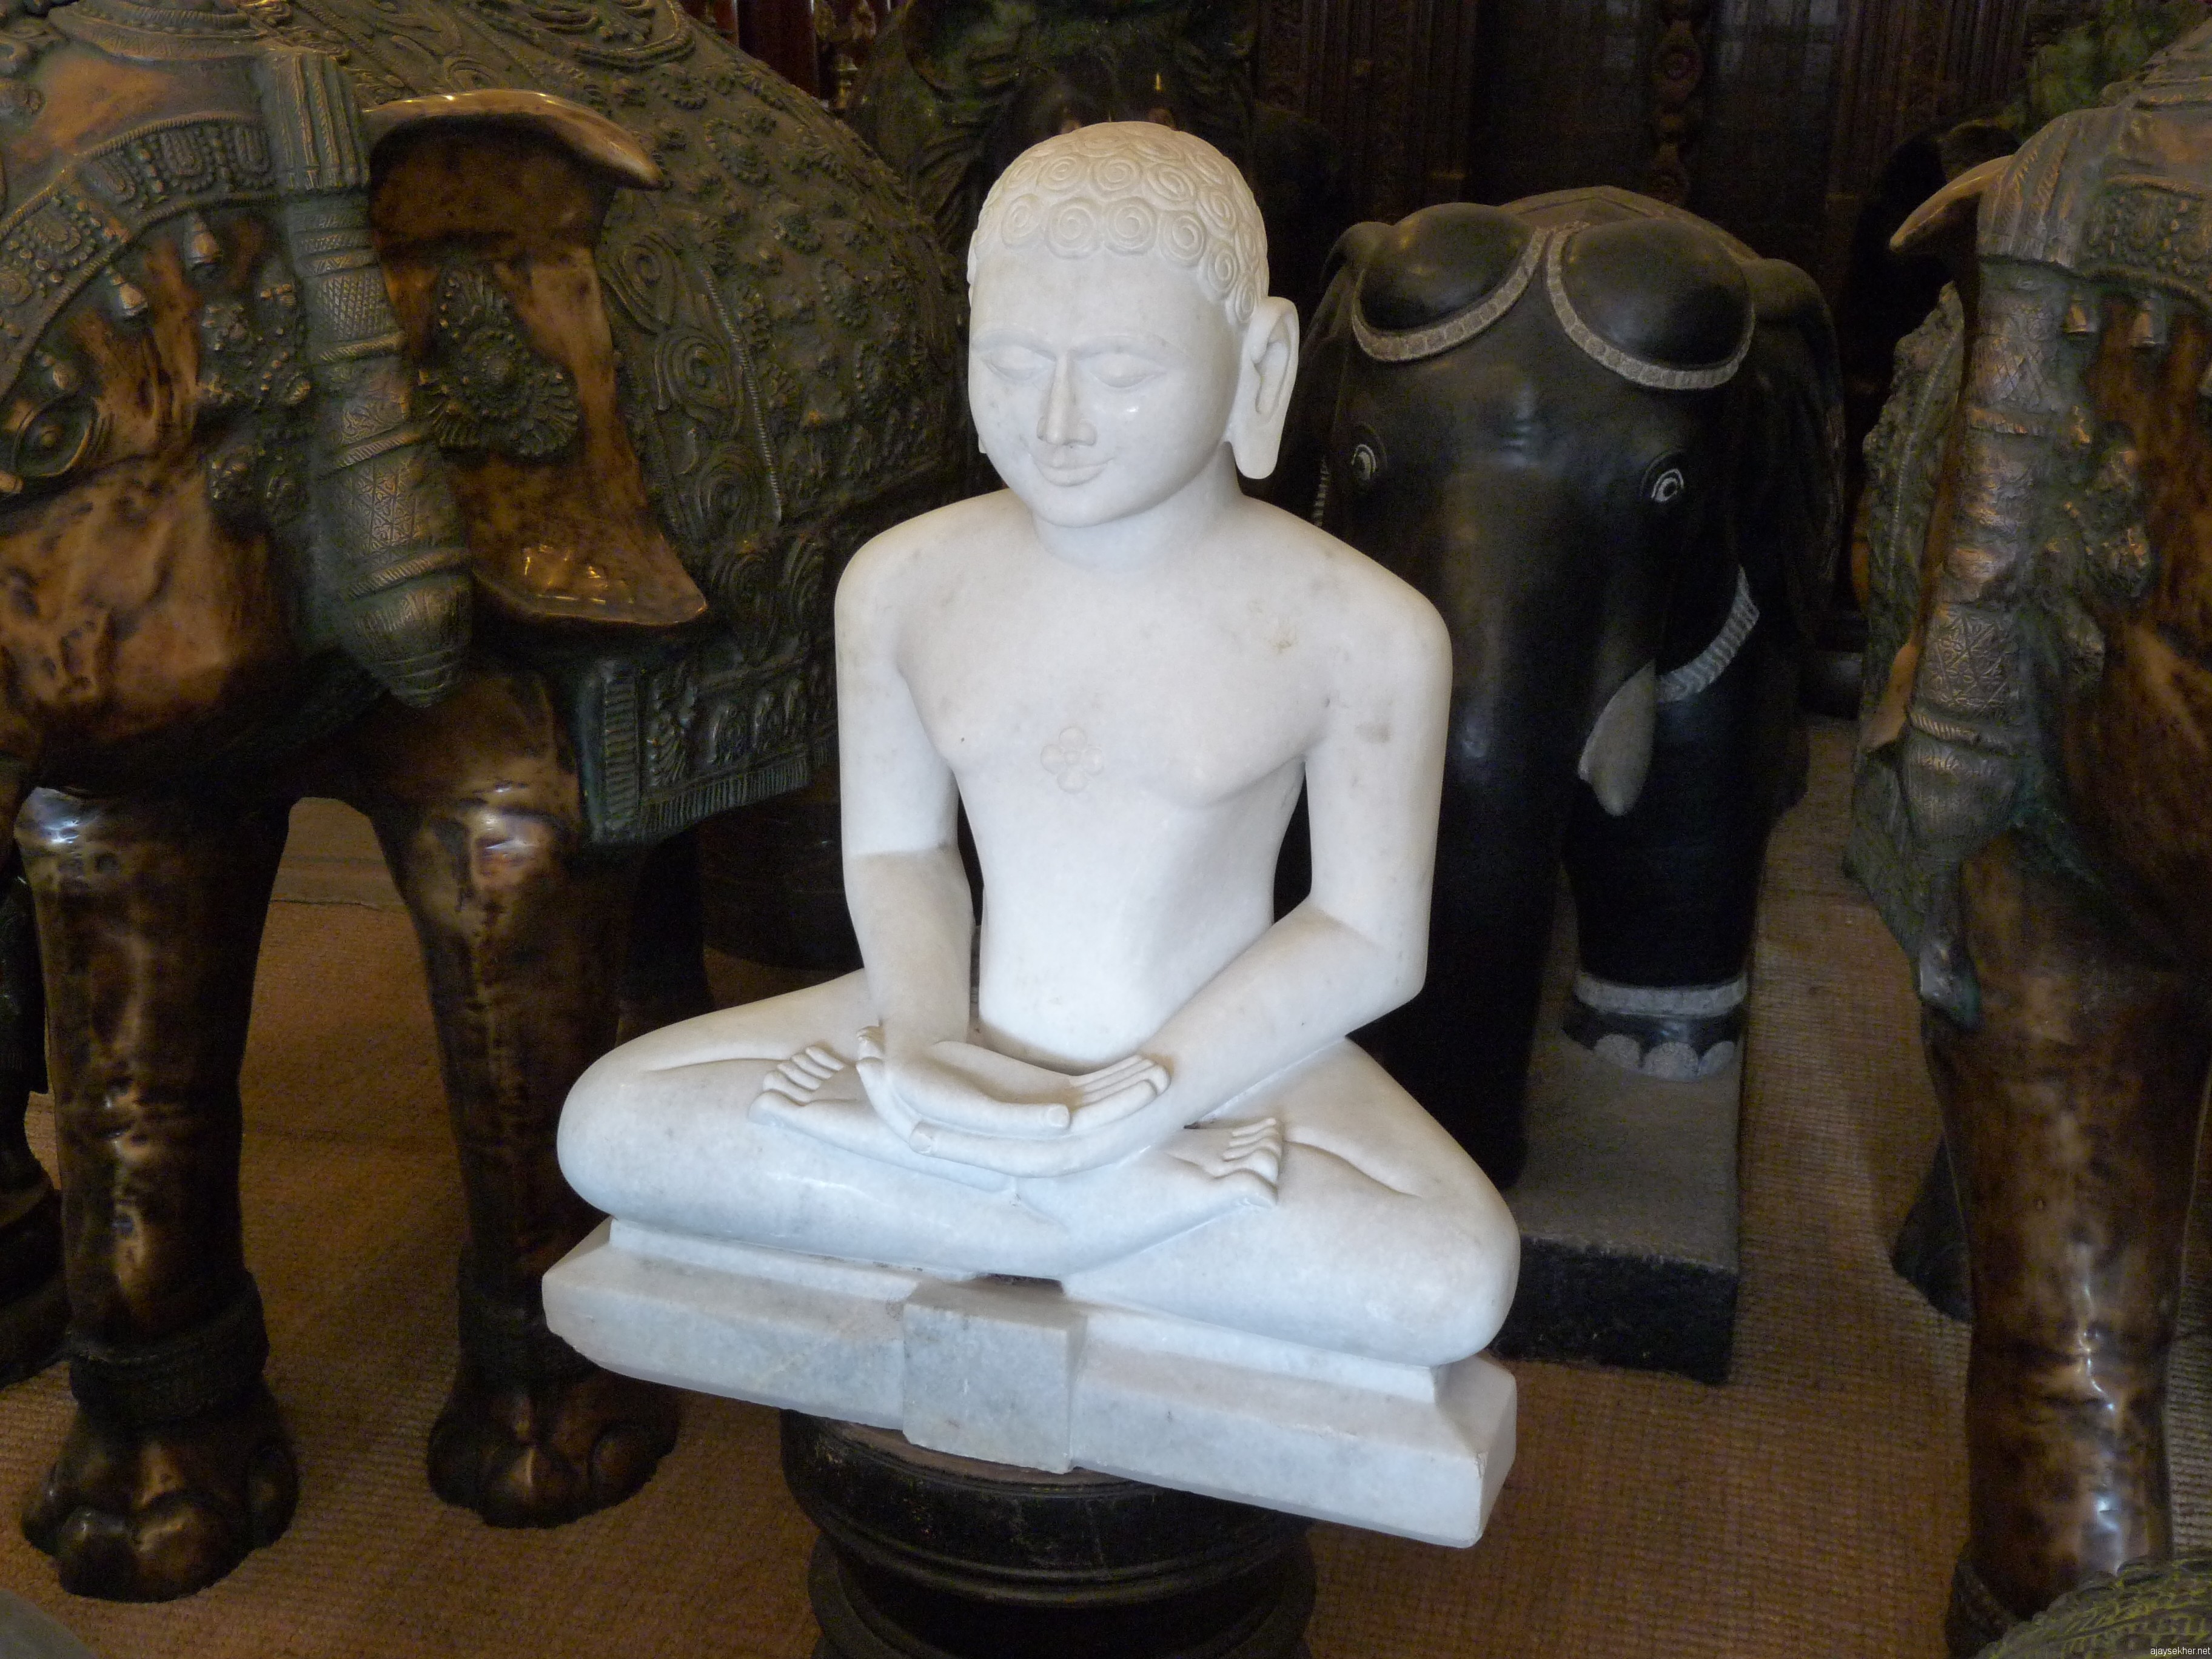 A Jina in white marble on display in an antique shop in Jew Town, Mattanchery.